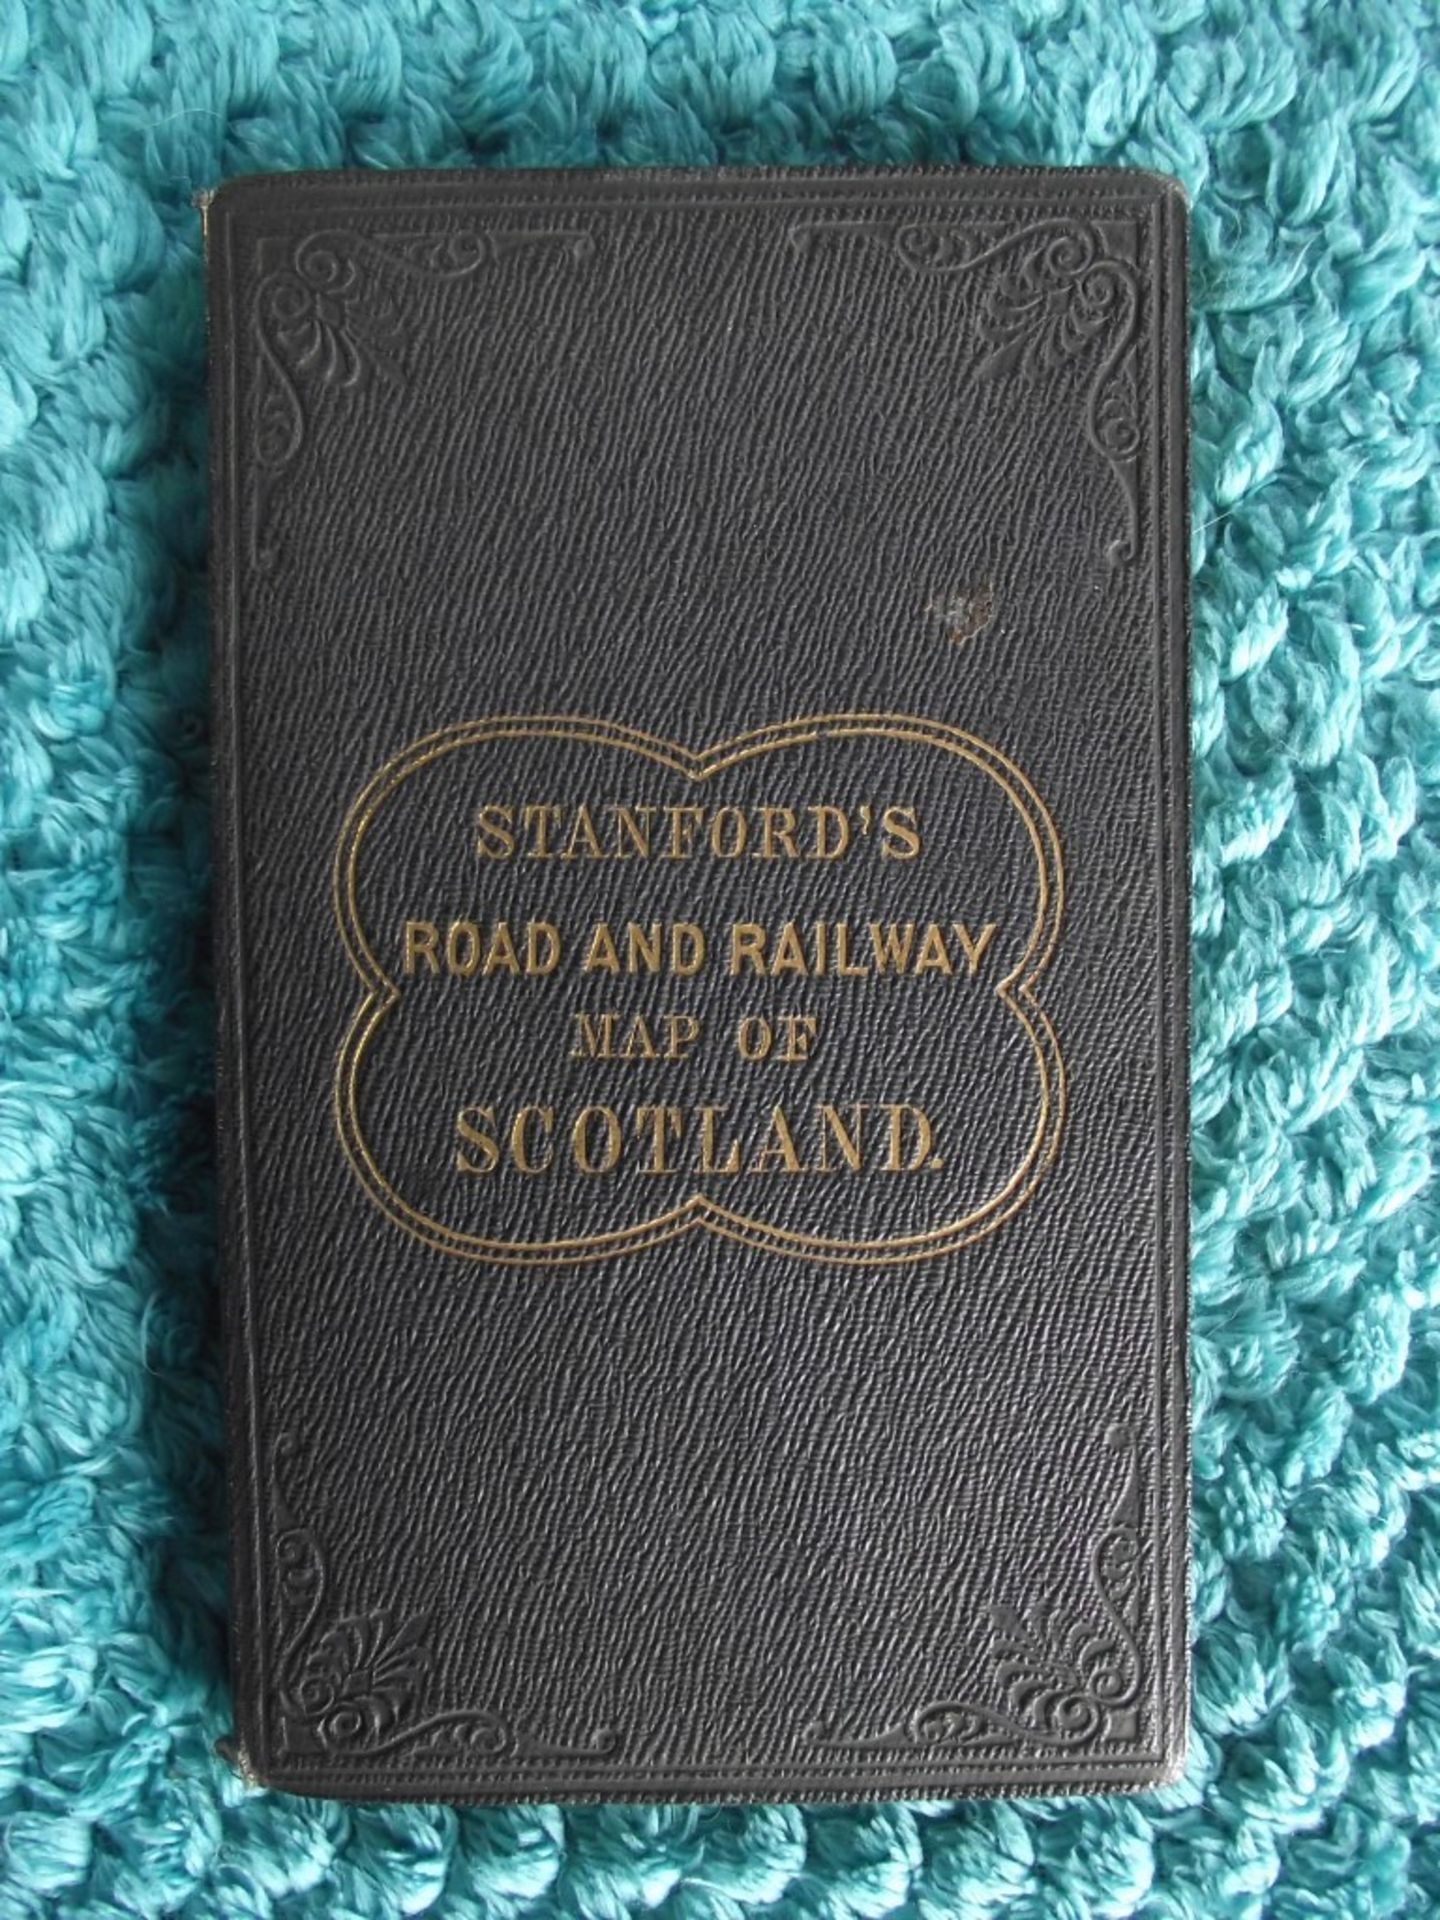 Stanford's Road and Railway Map of Scotland - 1858 - 24 Panels Laid On Linen - Image 2 of 25